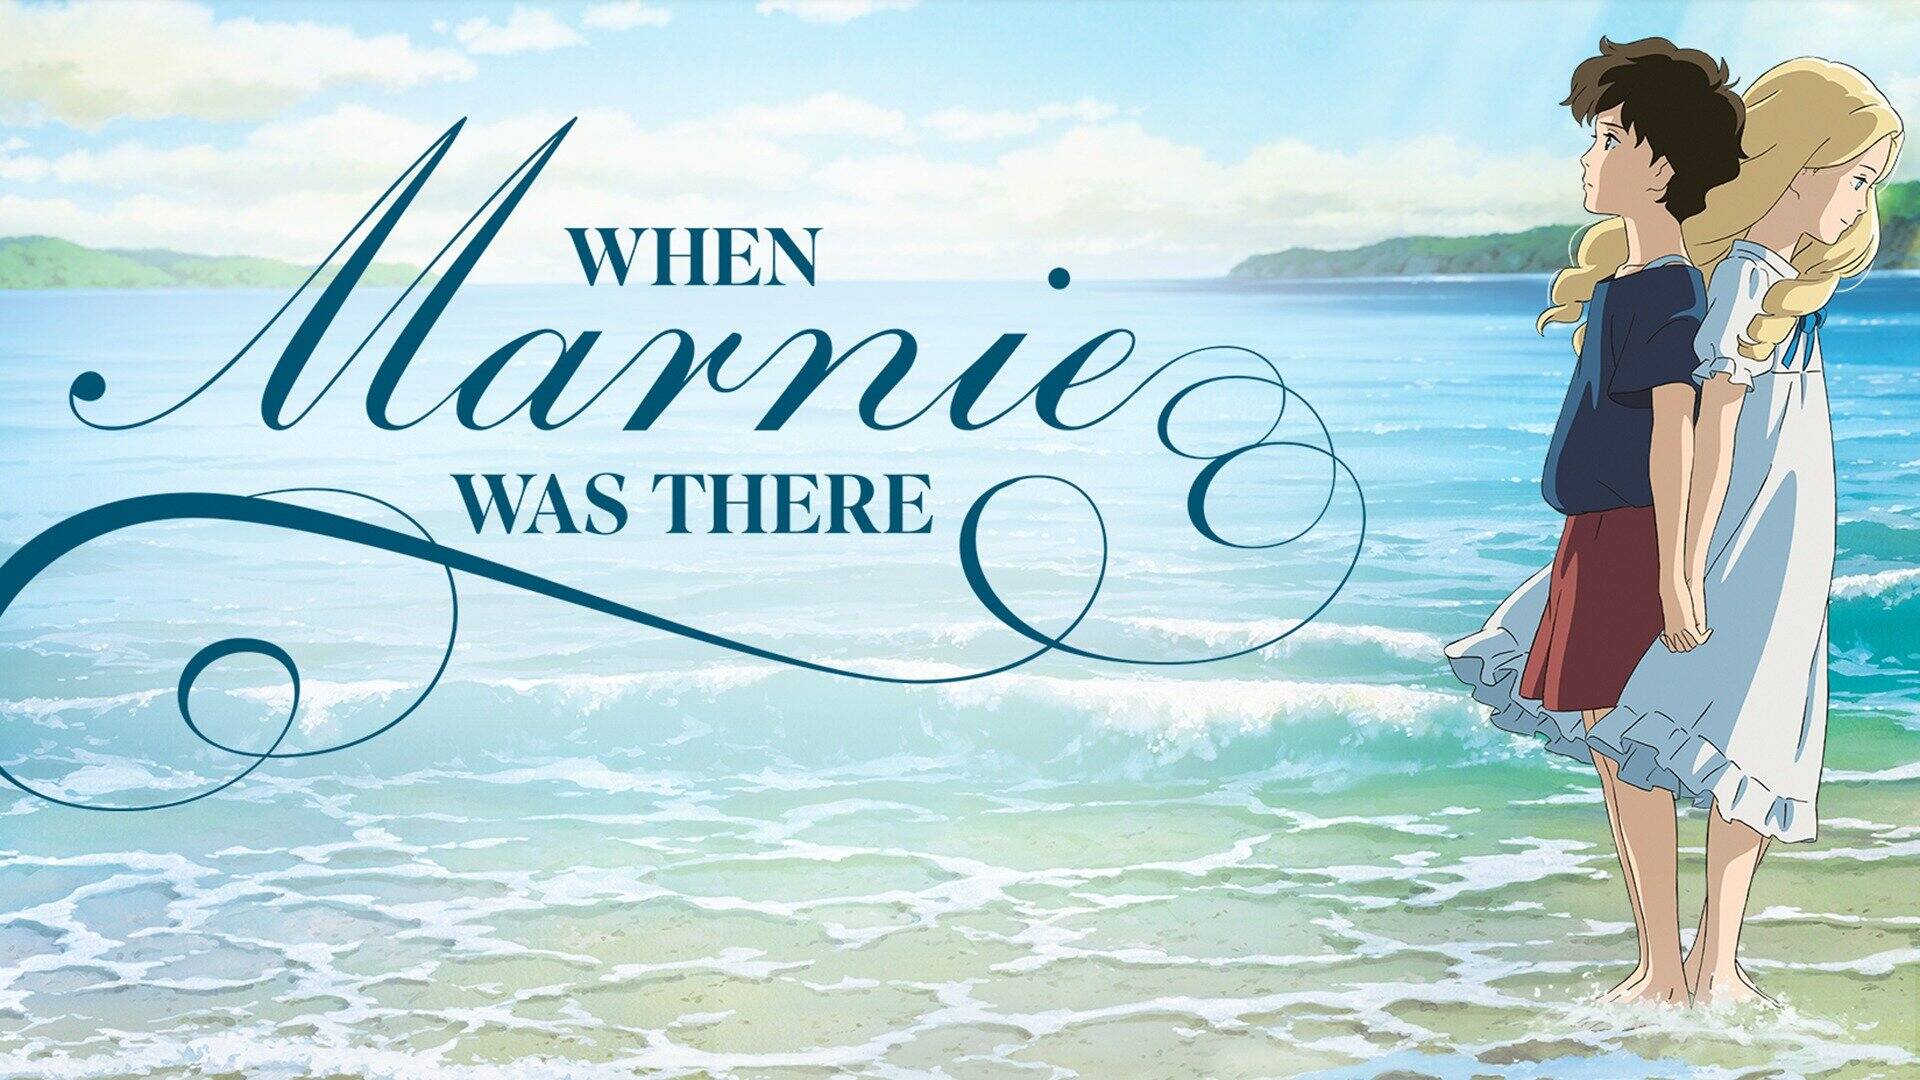 34-facts-about-the-movie-when-marnie-was-there